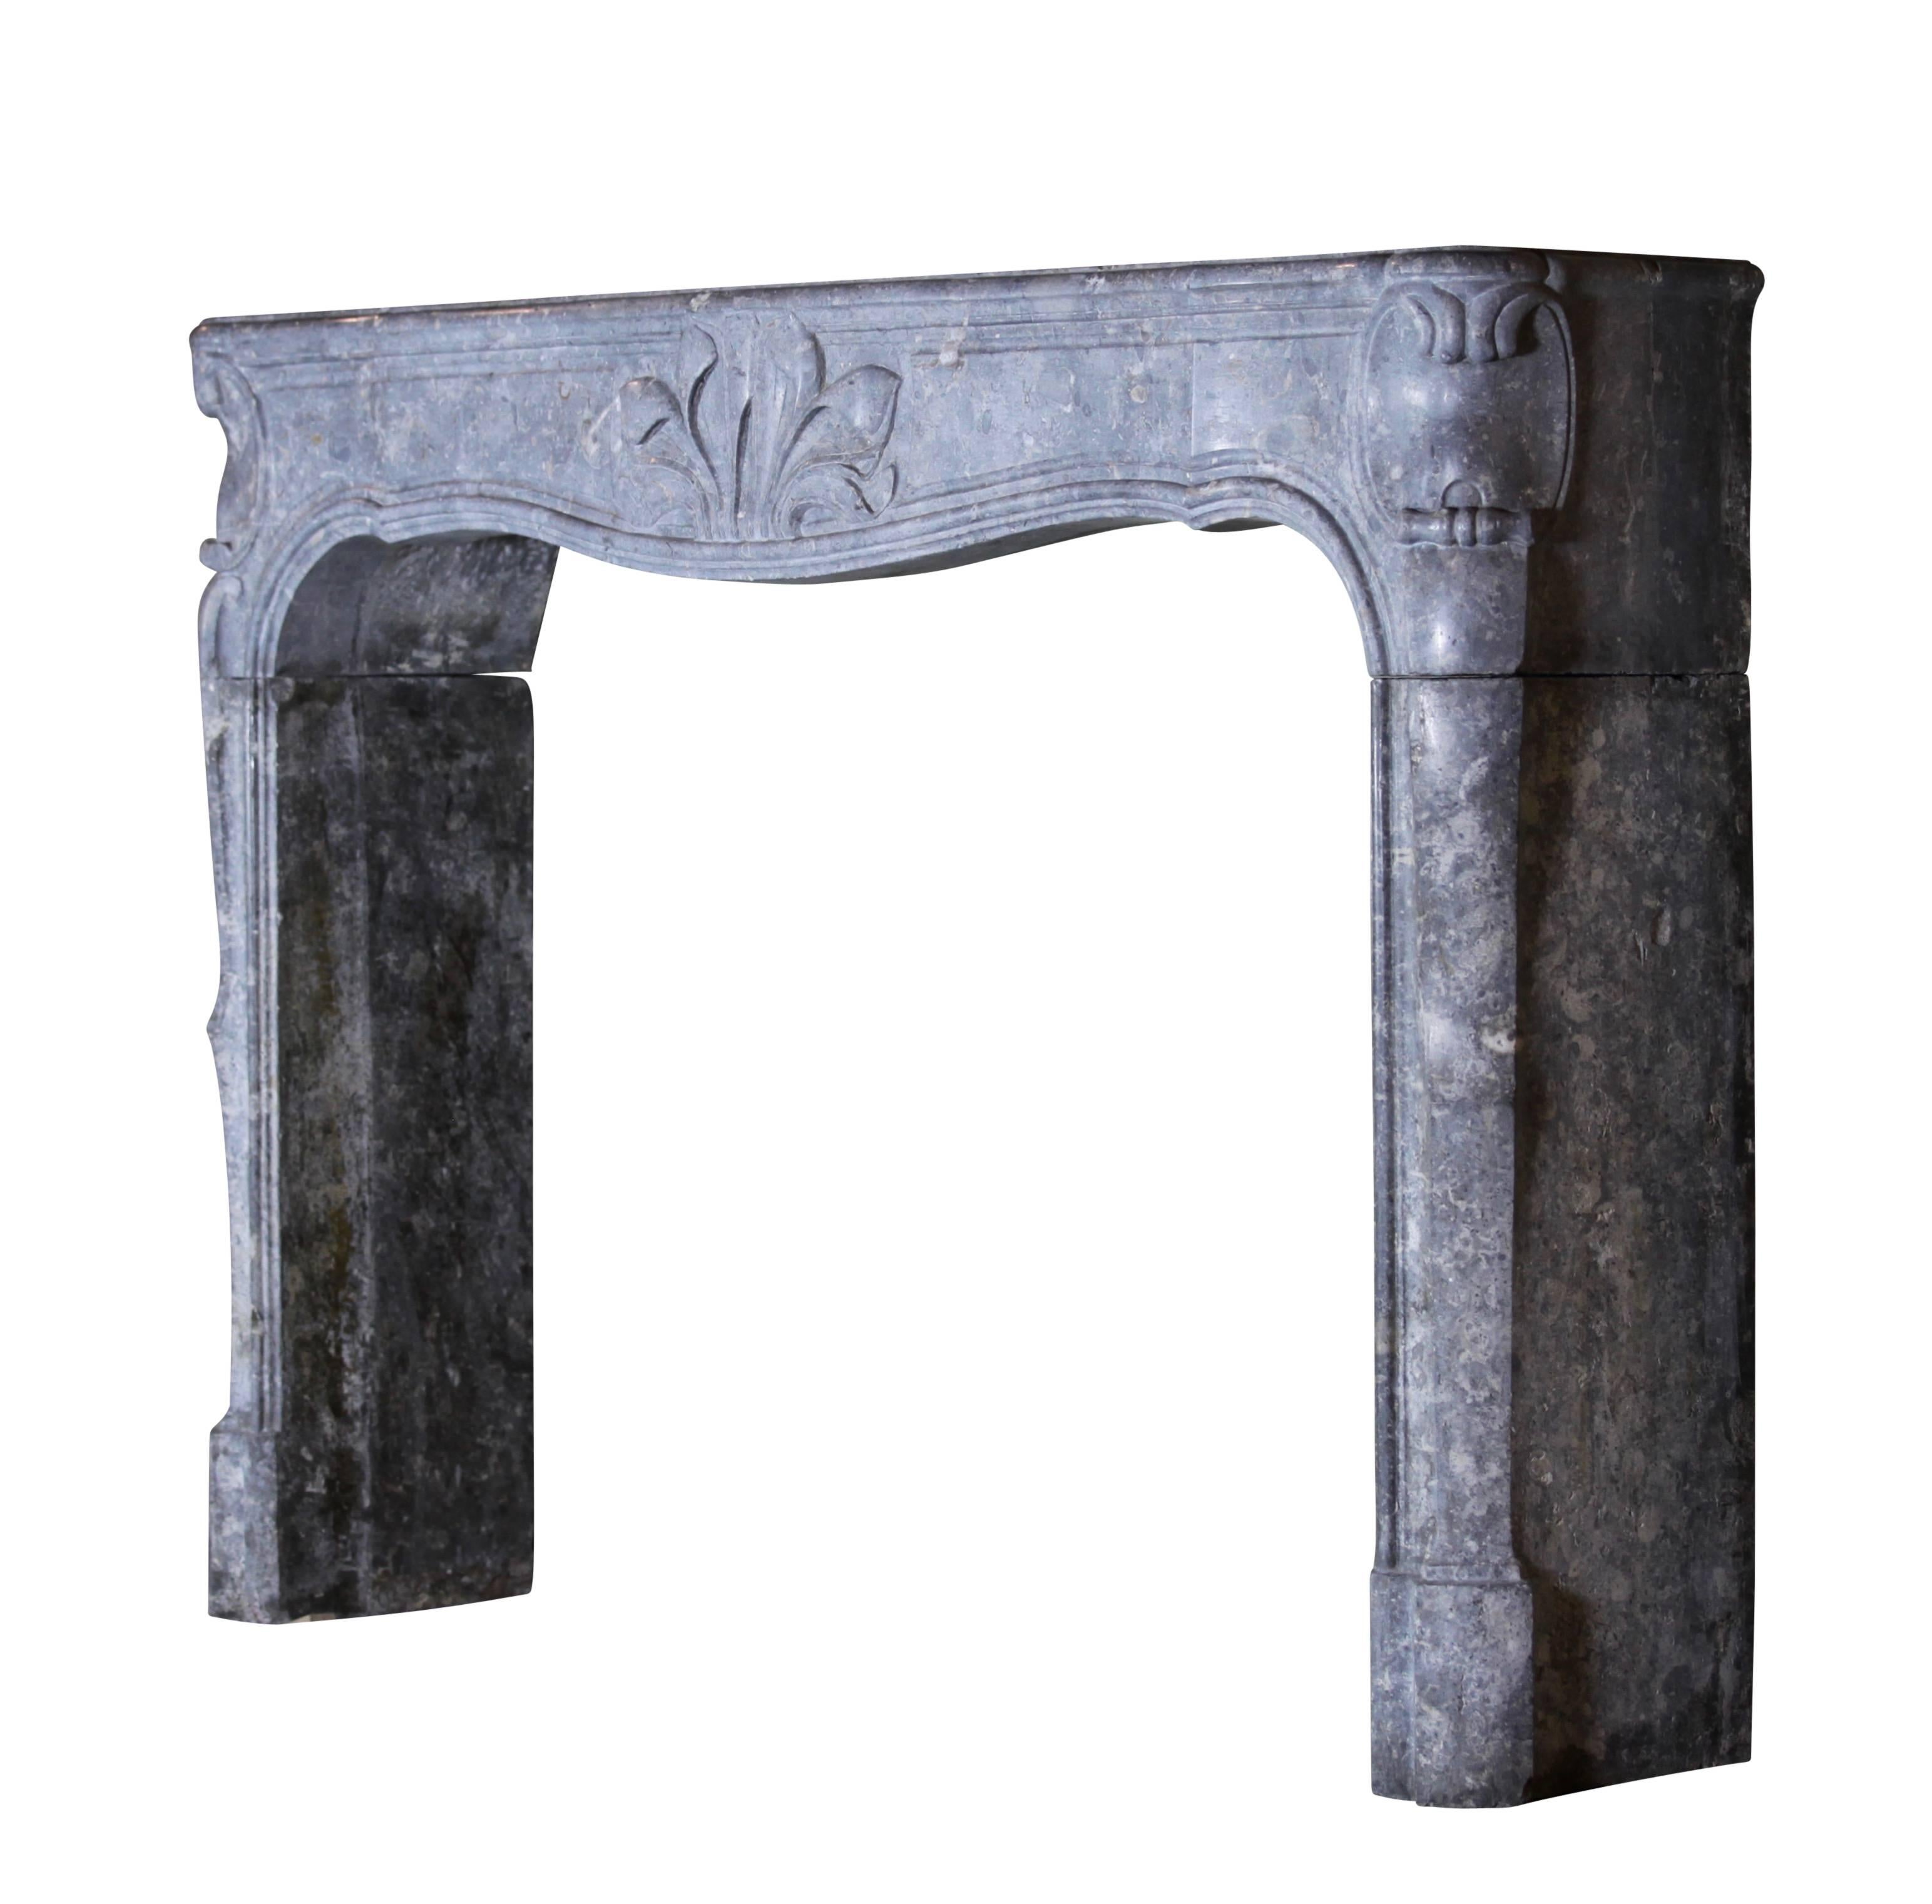 This vintage fireplace surround is made of grey-blue bicolor Burgundy hard stone. It bears a flower motif on the fronton. A great mantel (fireplace), one in his kind.
Measures:
157 cm EW 61.81